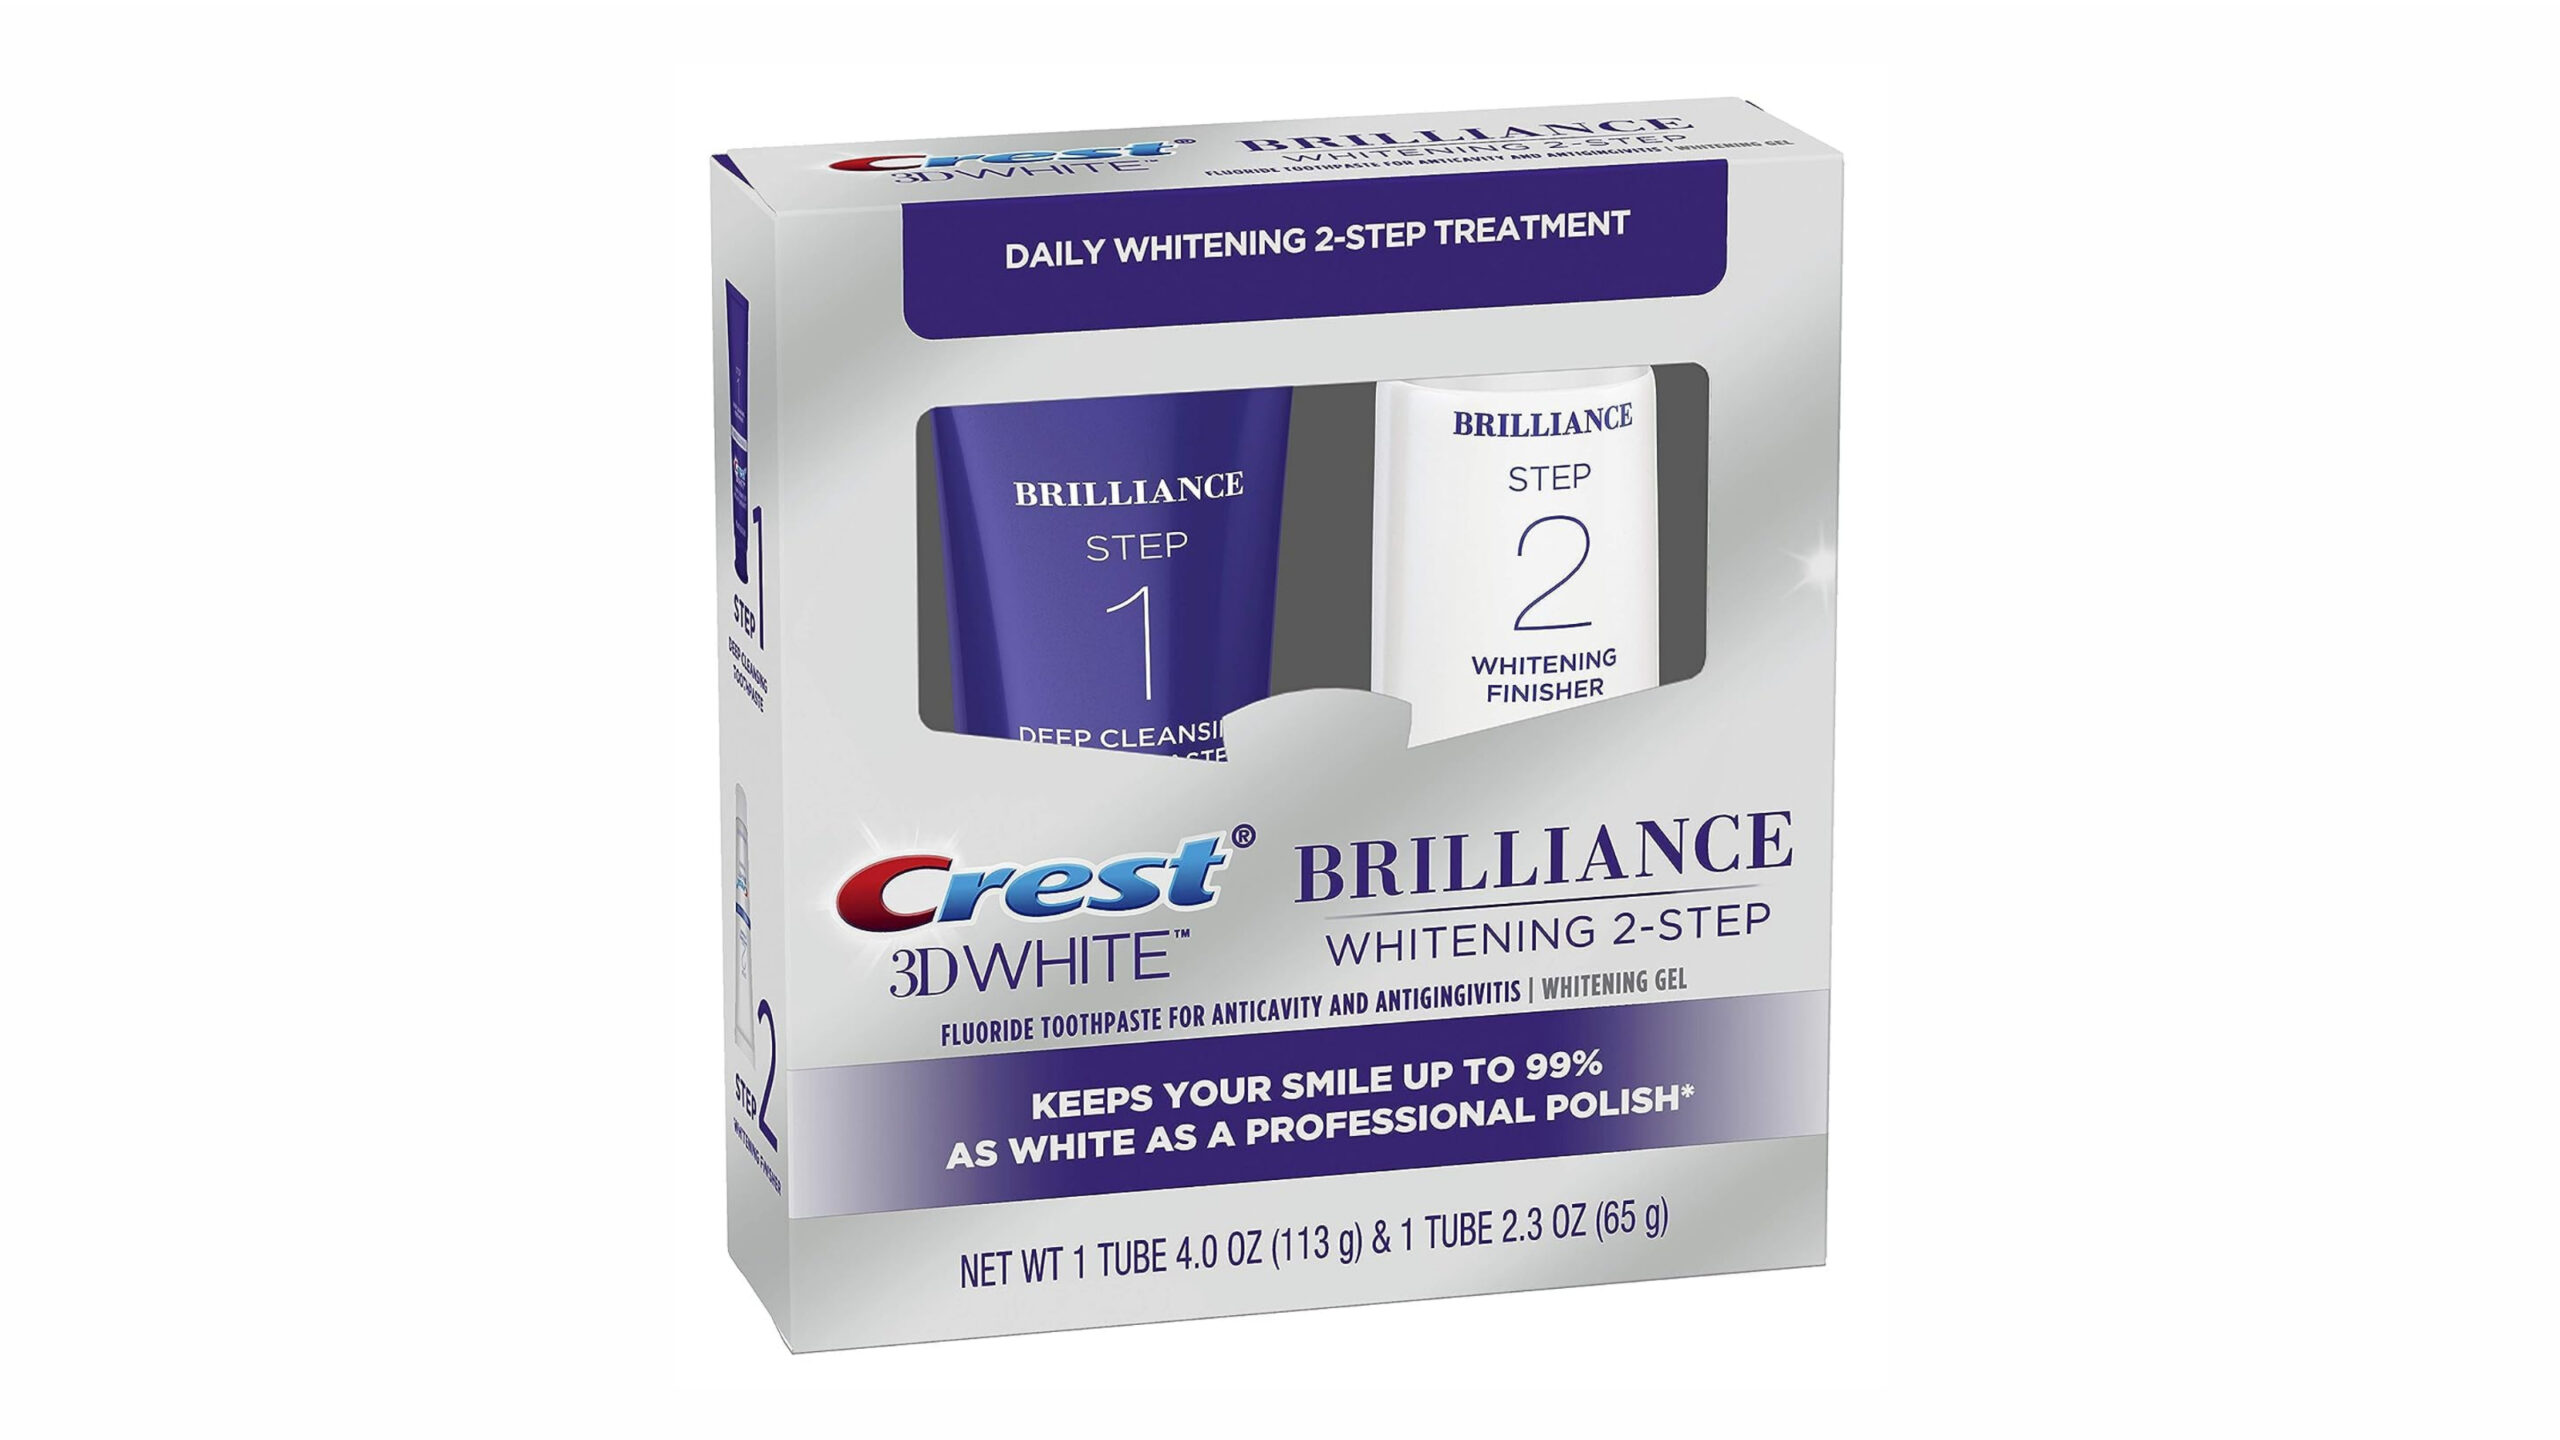 image of crest 3d white brilliance 2 step kit, which includes a 4oz tube of deep clean toothpaste and a 2.3oz tube of teeth whitening gel